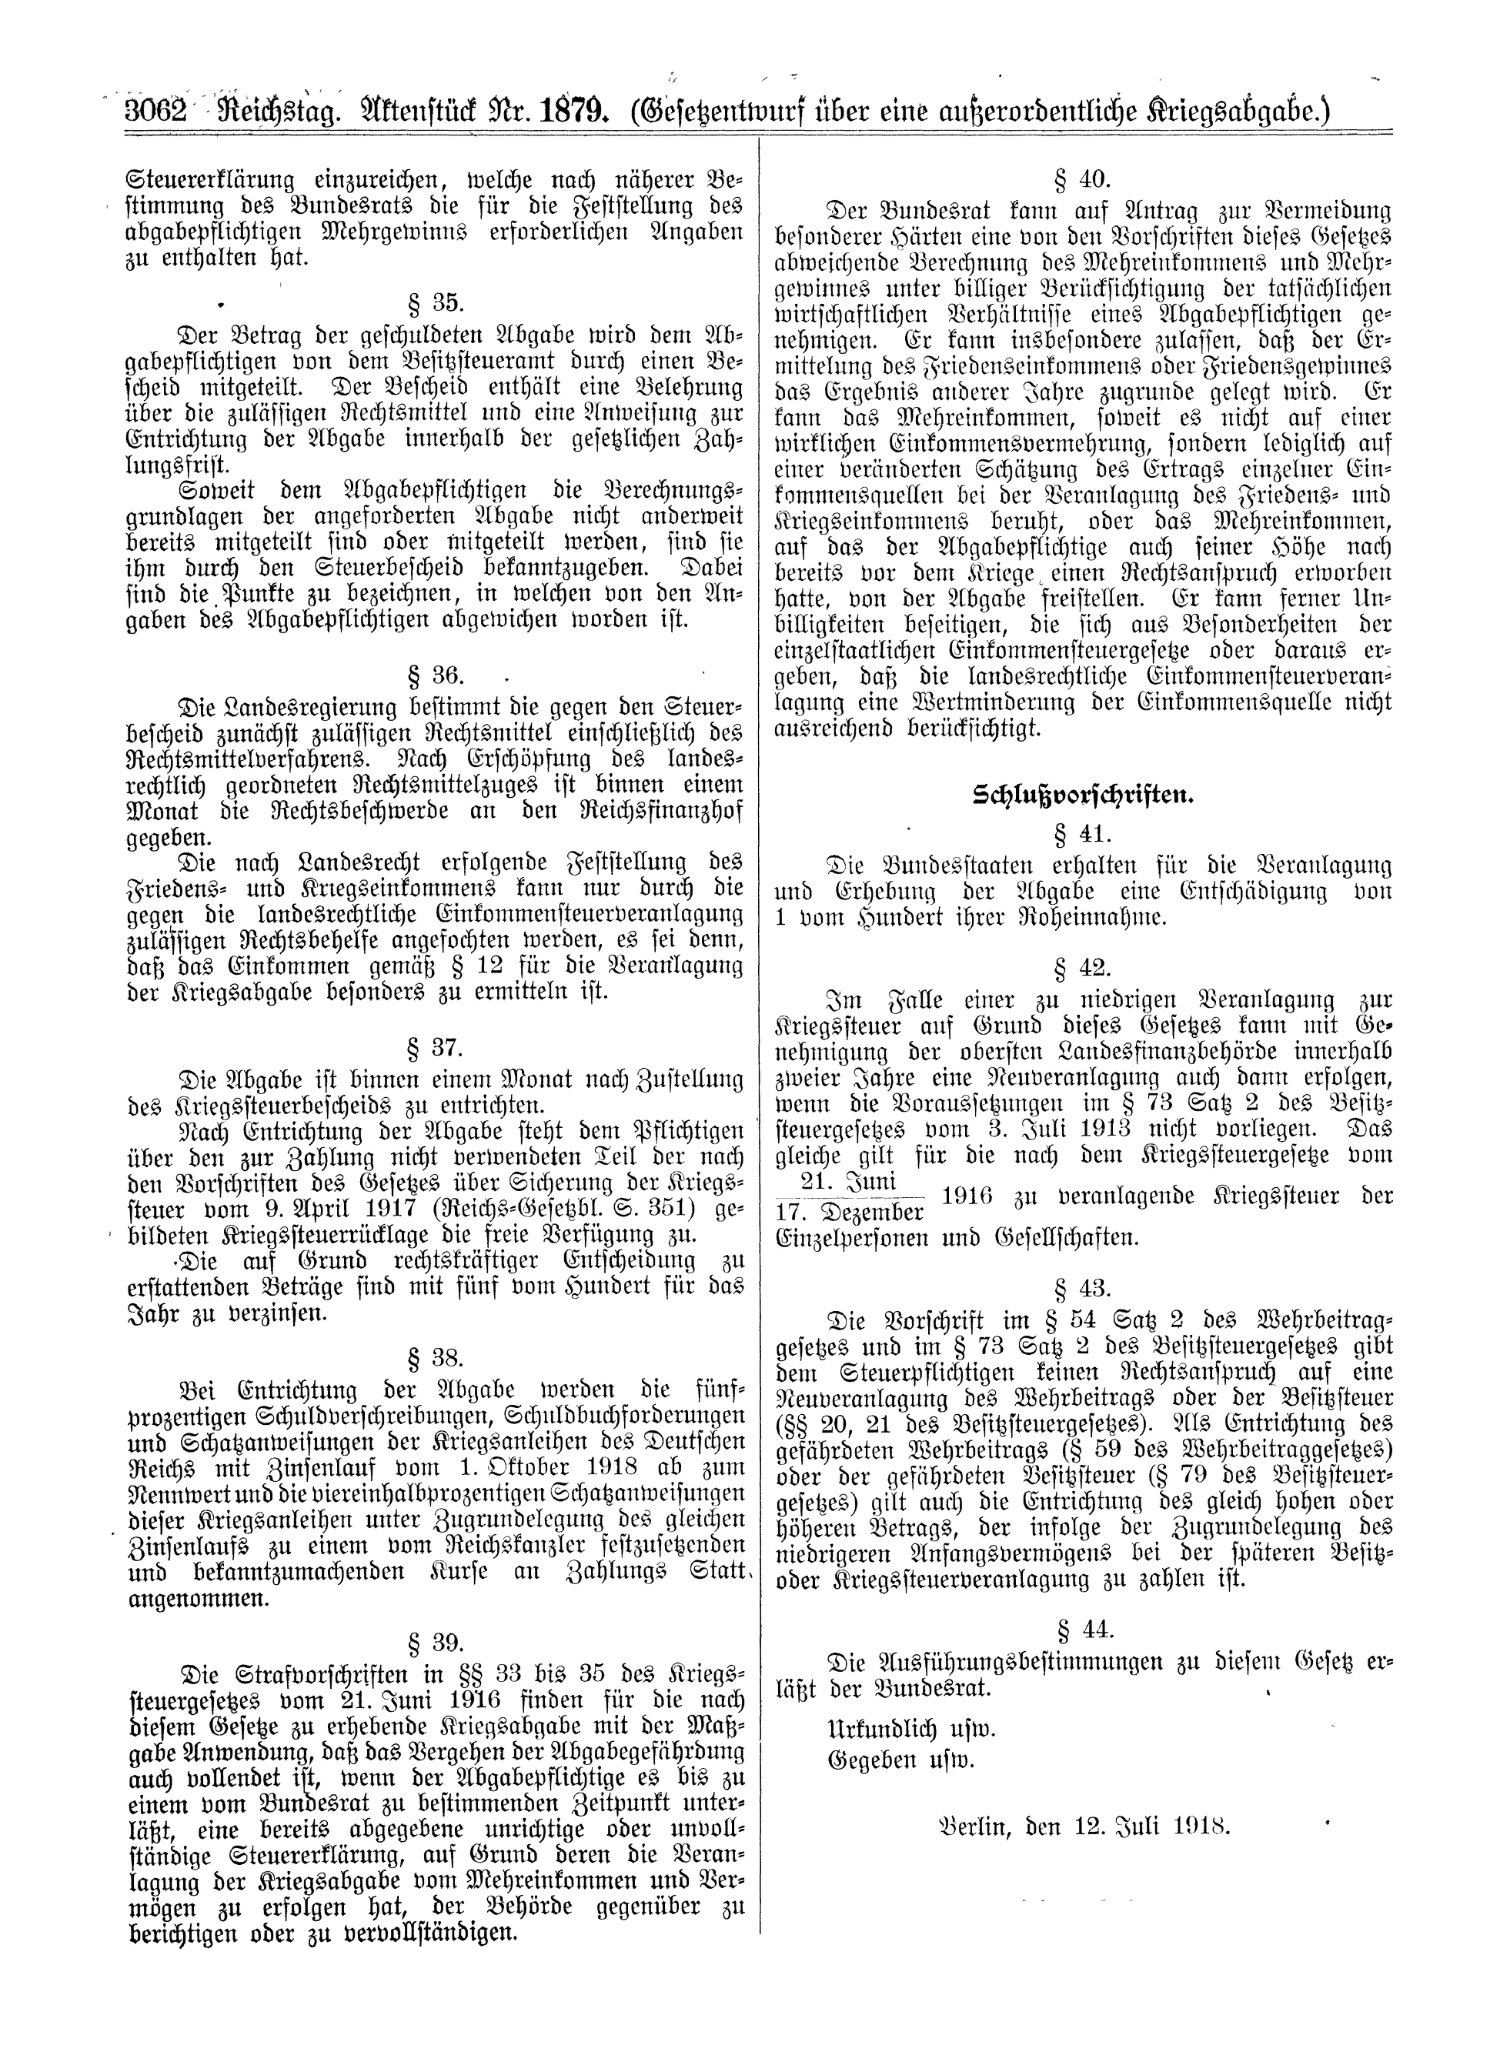 Scan of page 3062